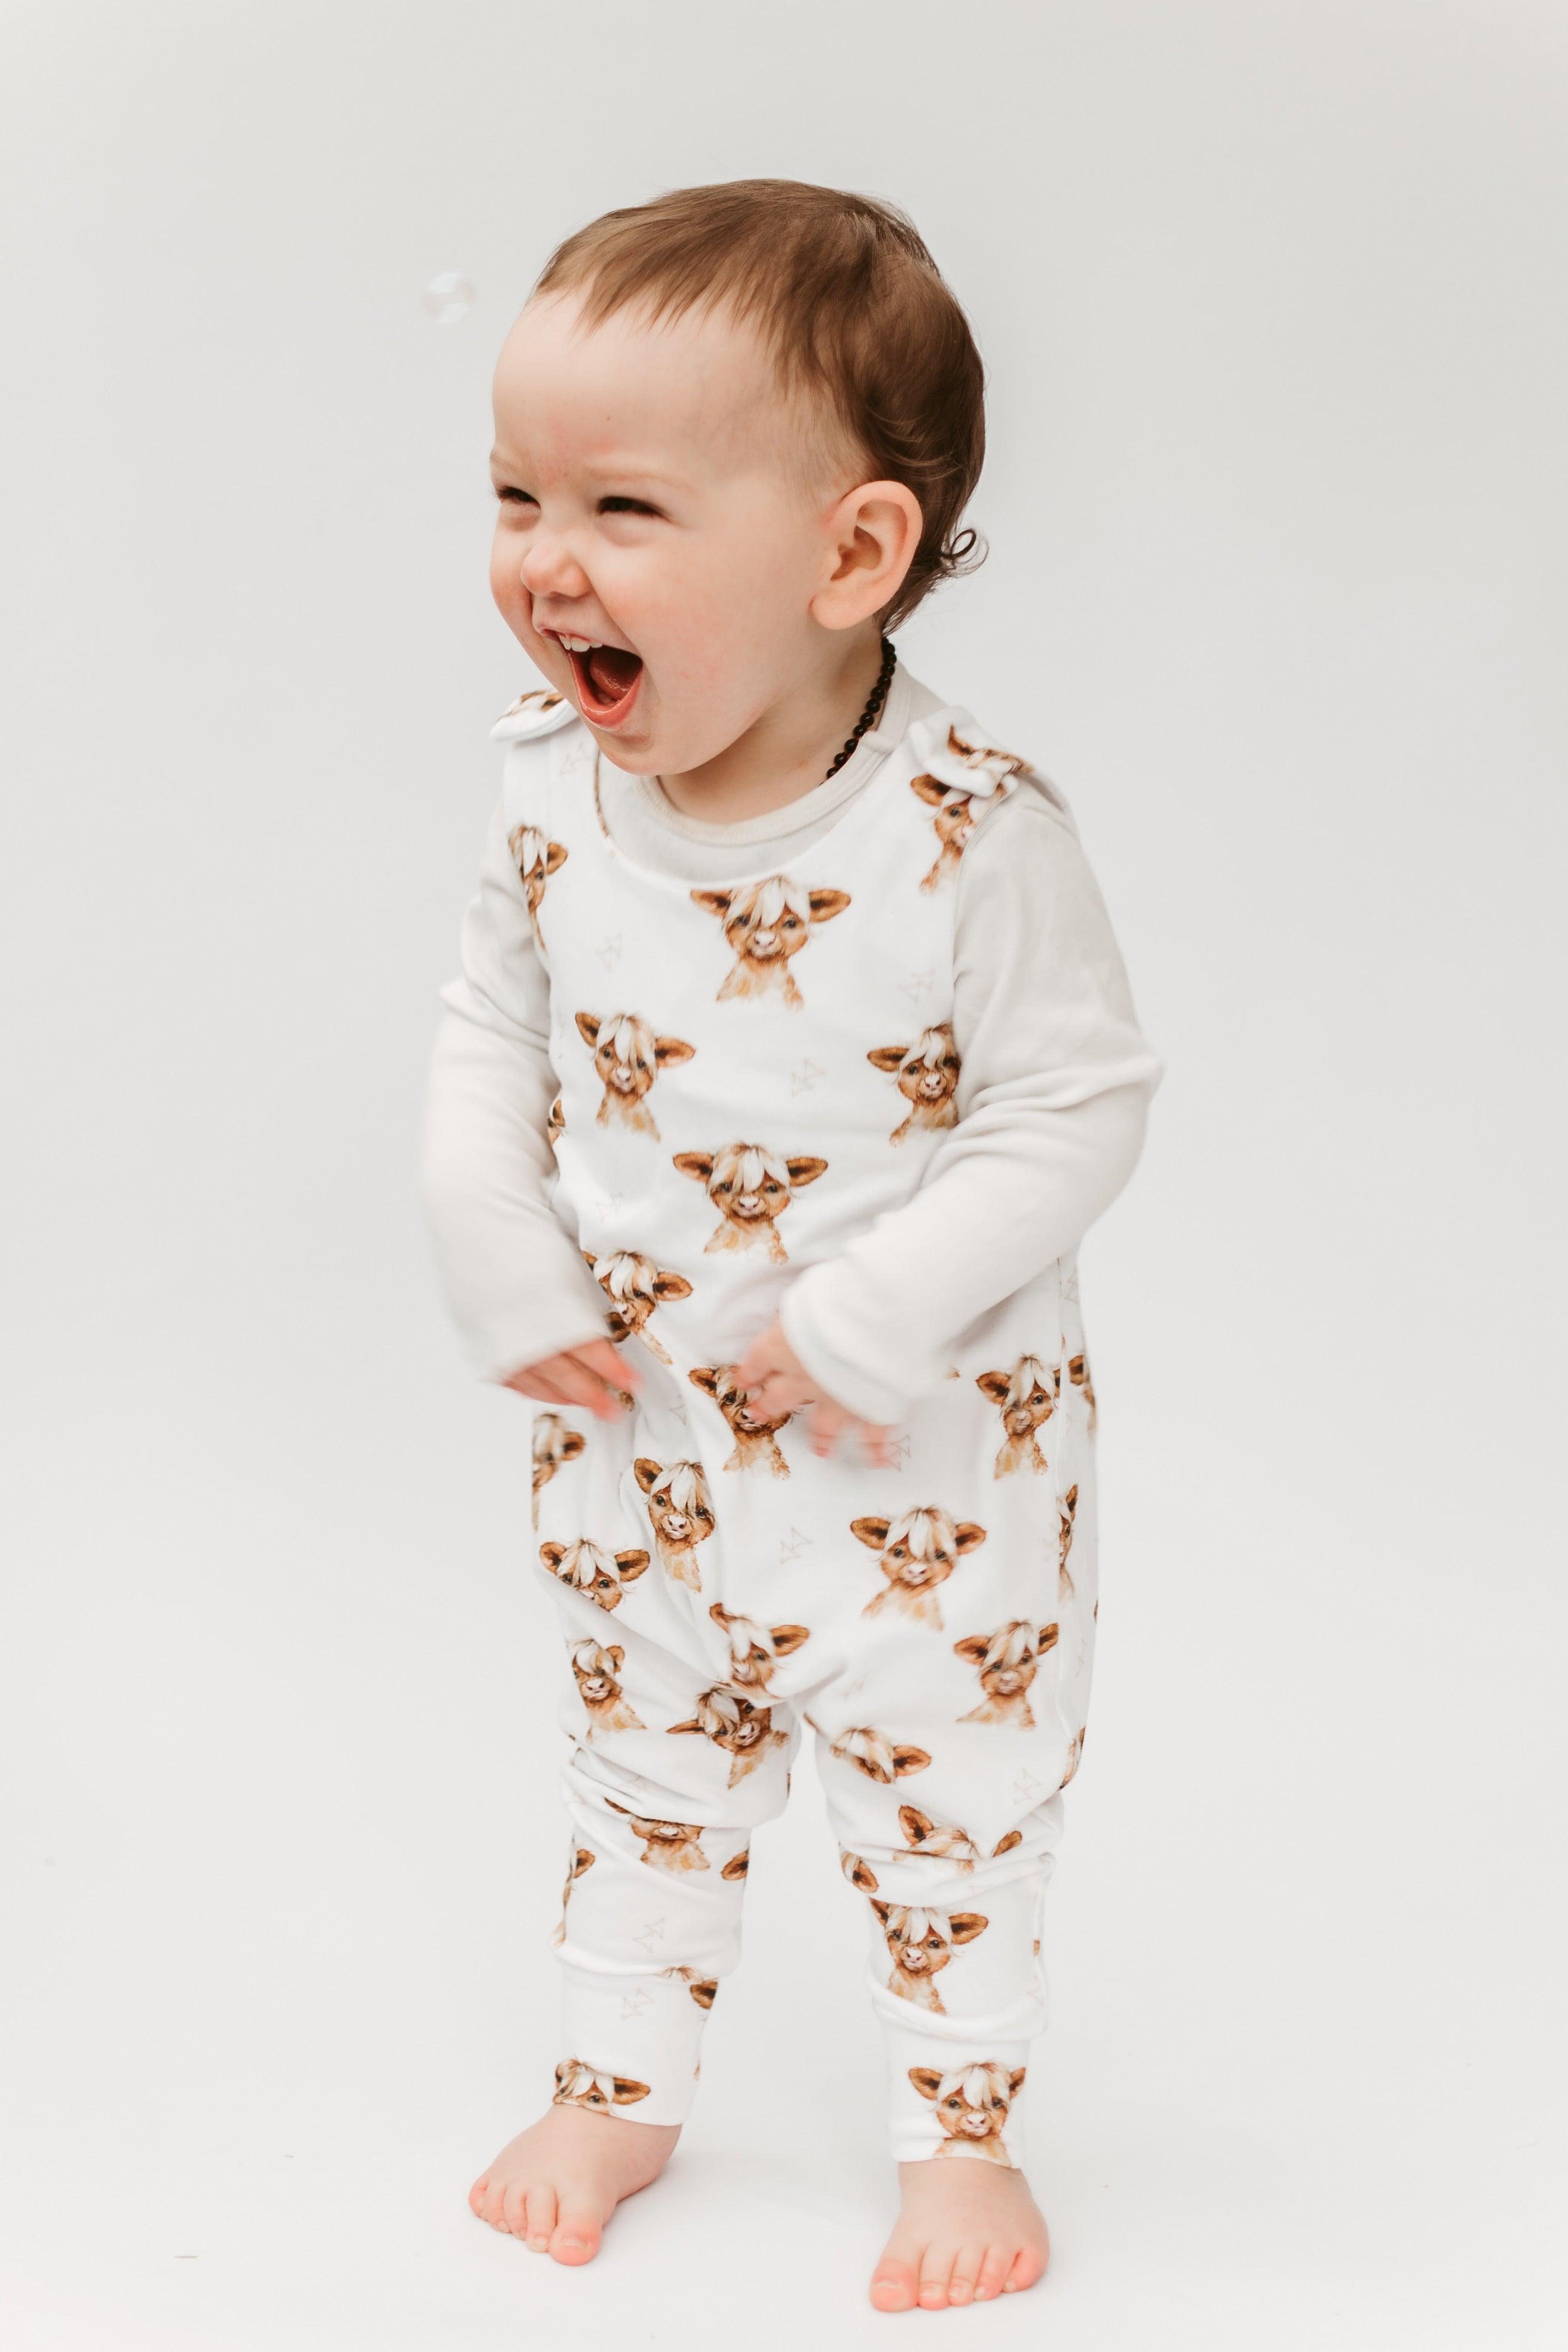 Hamish the Highland Cow Dungaree Romper